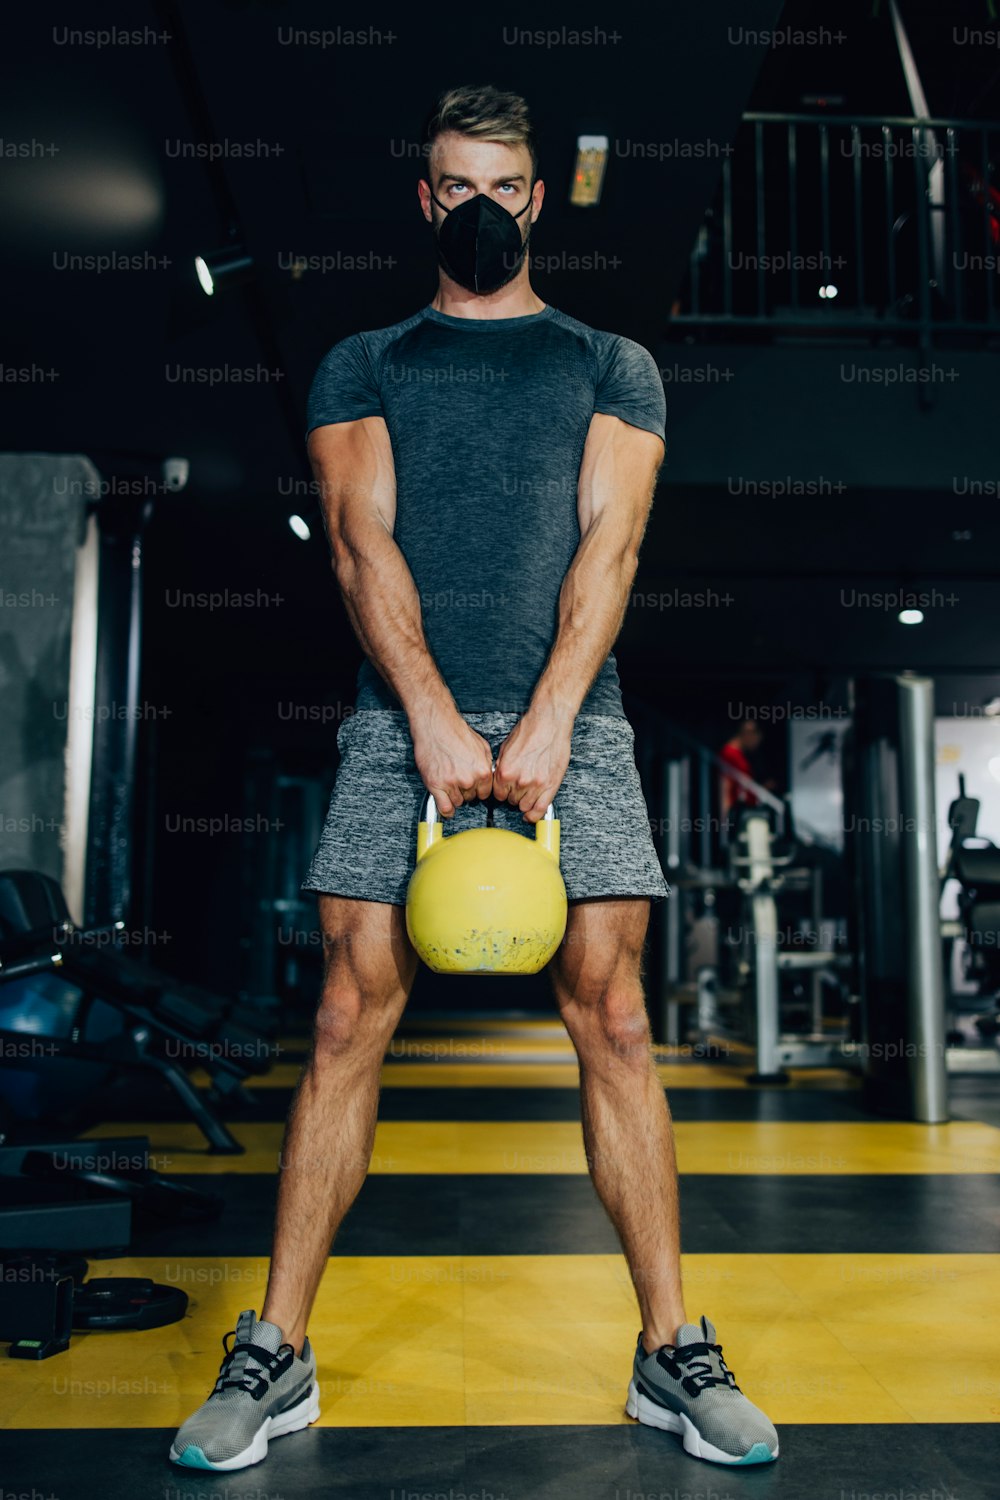 Good looking handsome male athlete with protective face mask exercising in modern fitness gym. Dark muddy light with strong shadows. Pandemic sports indoors concept.